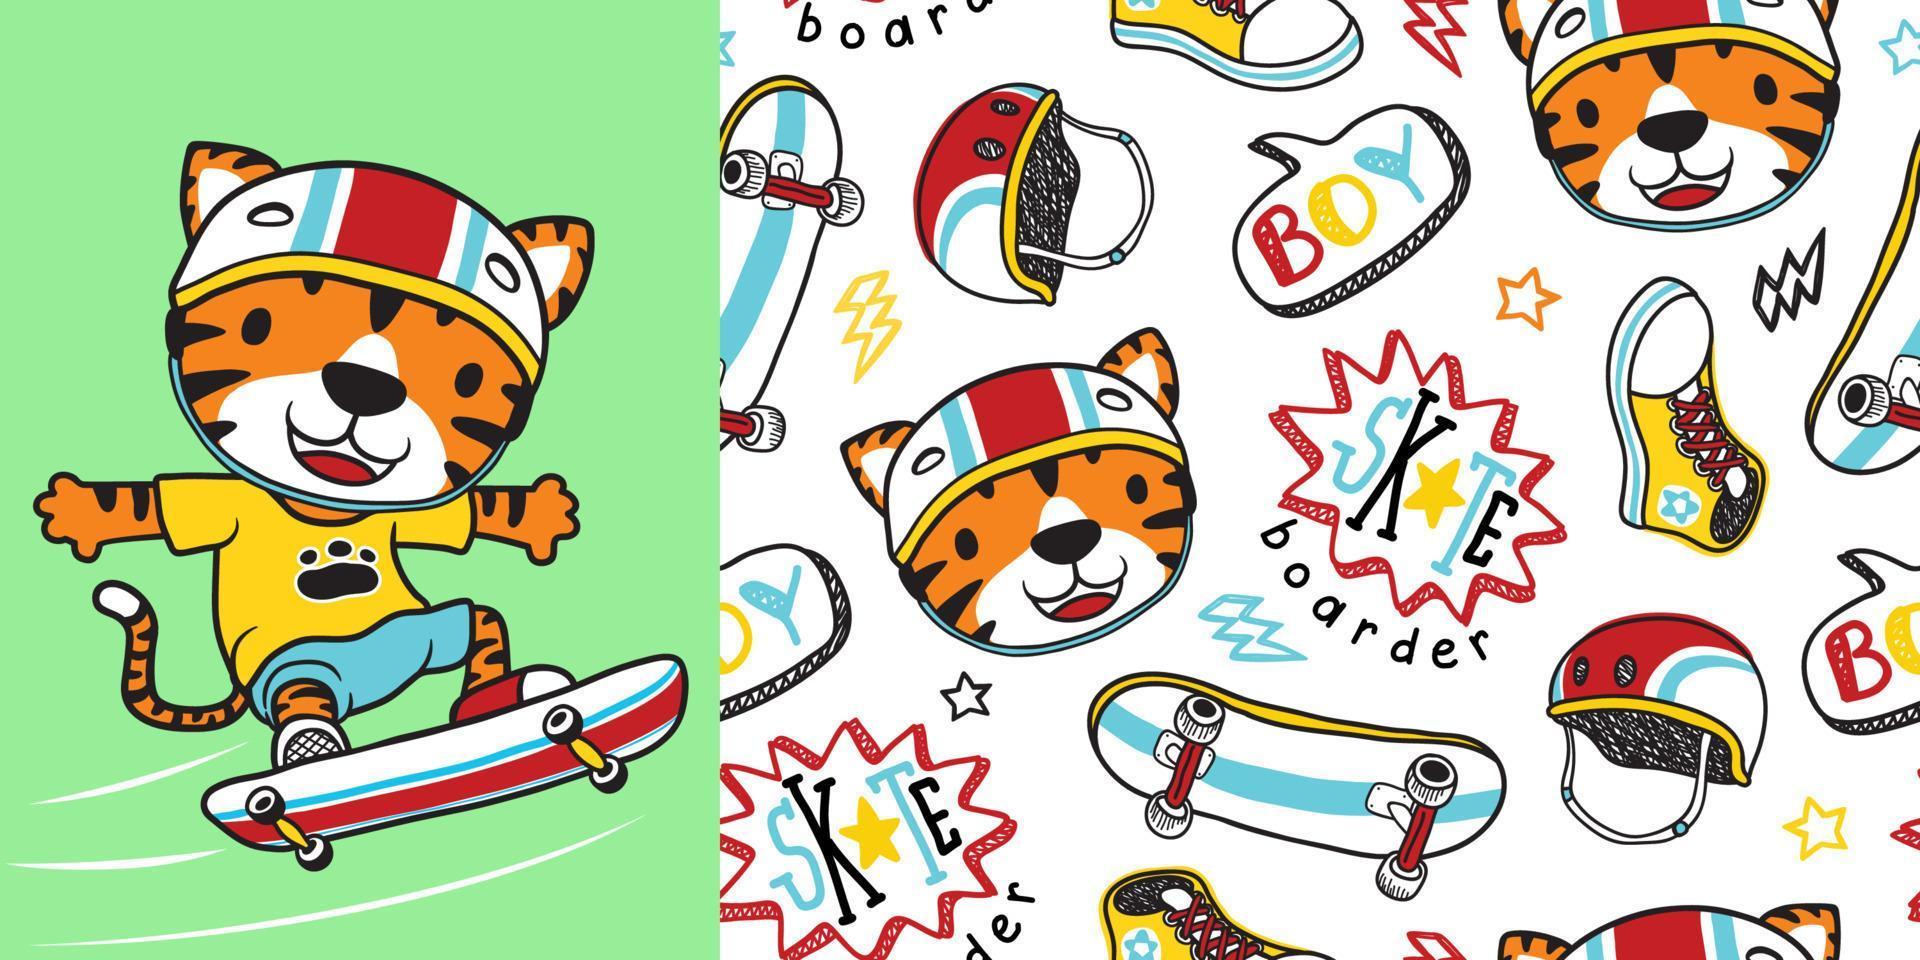 Hand drawn cute tiger cartoon playing skateboard with  seamless pattern skateboard elements vector